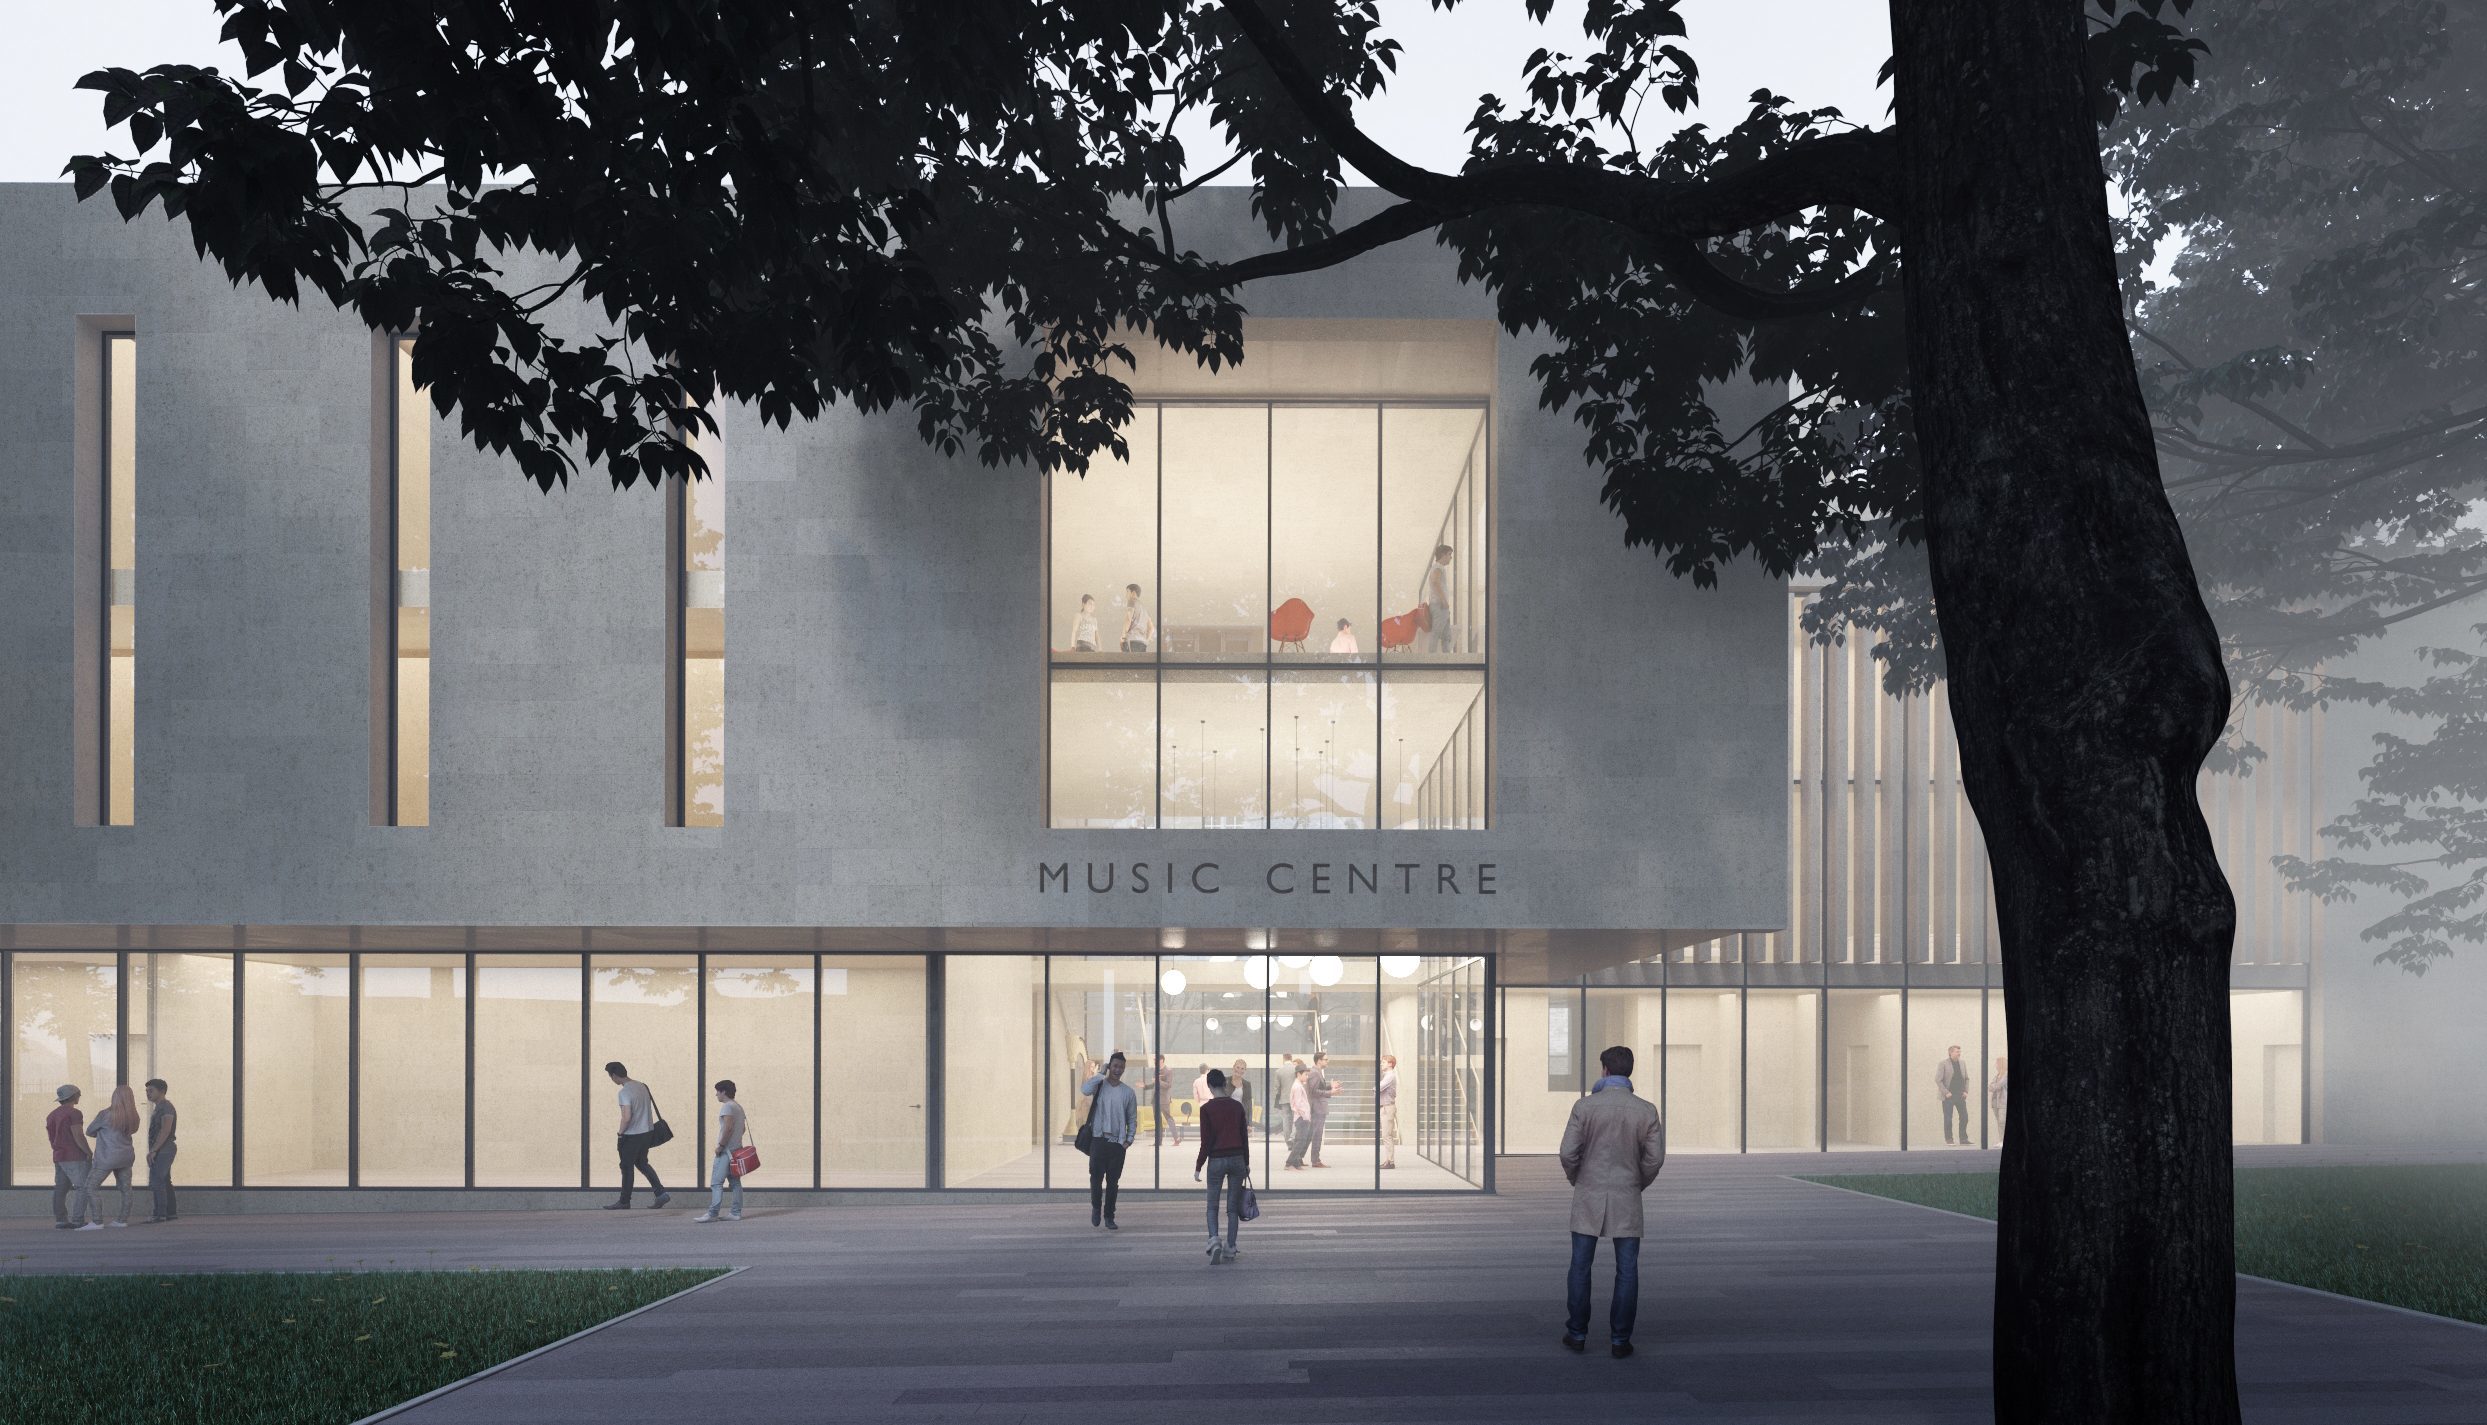 How the new music centre might look.